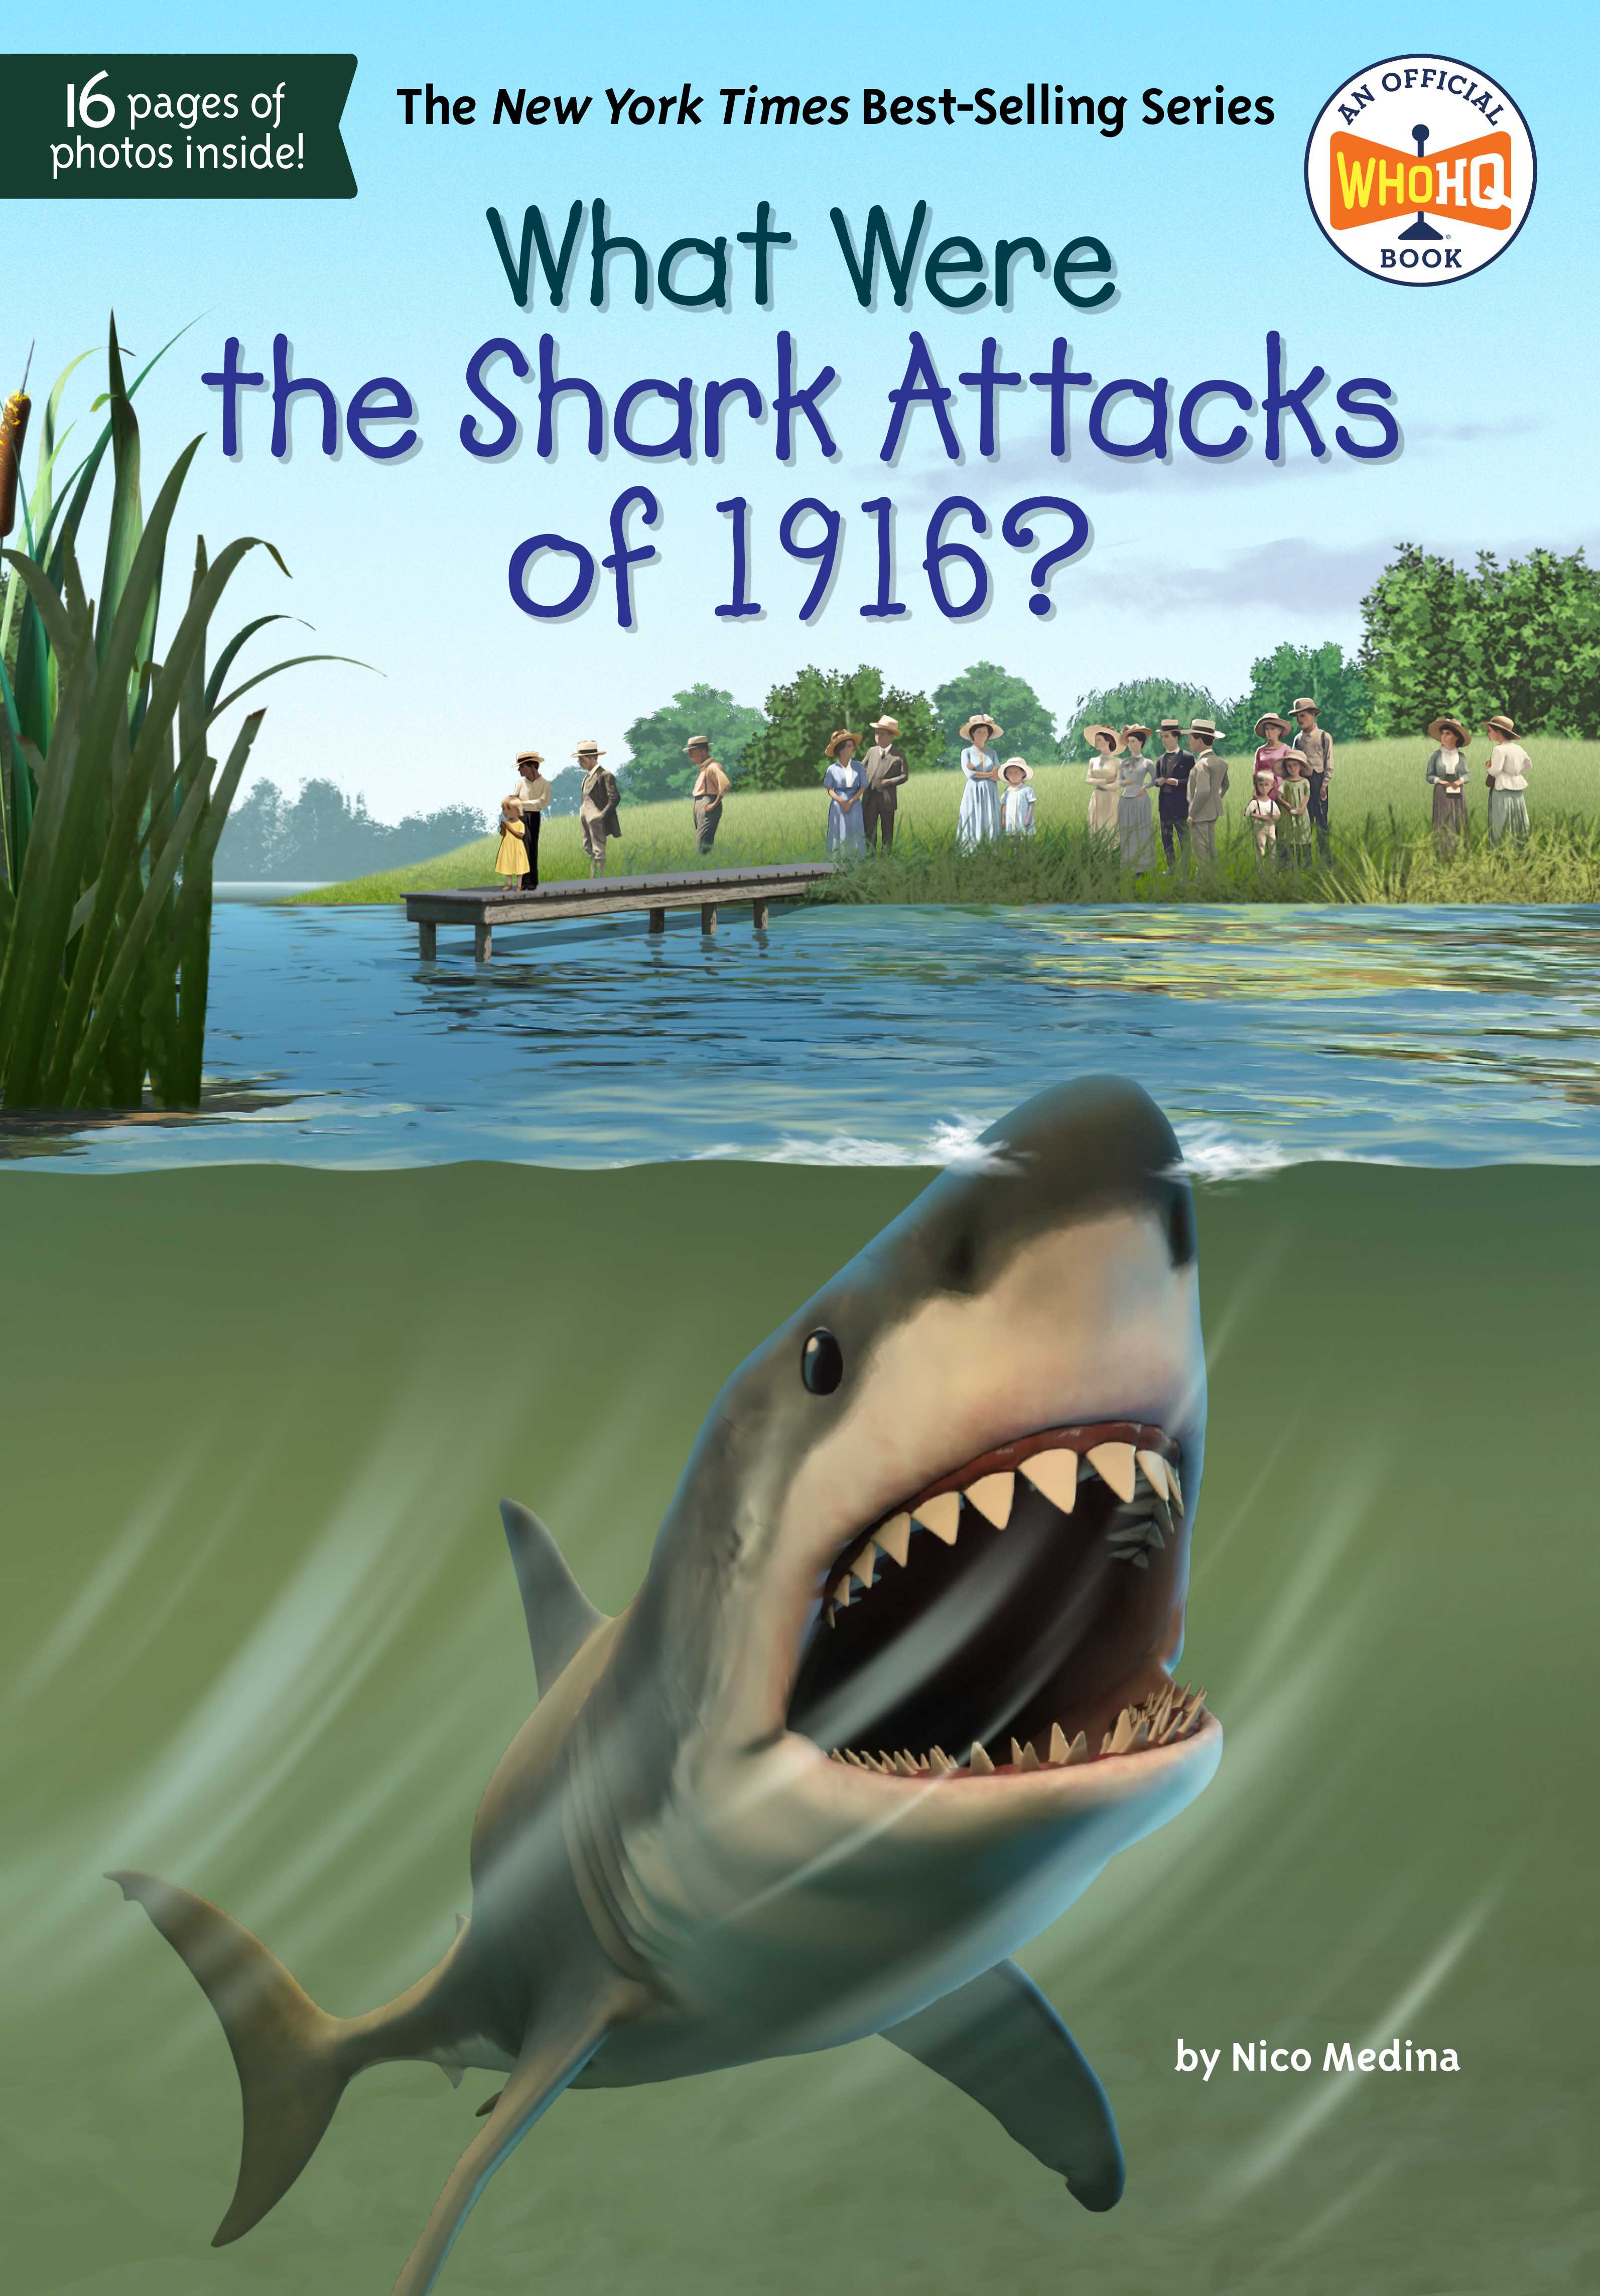 What Were the Shark Attacks of 1916? (Who HQ)